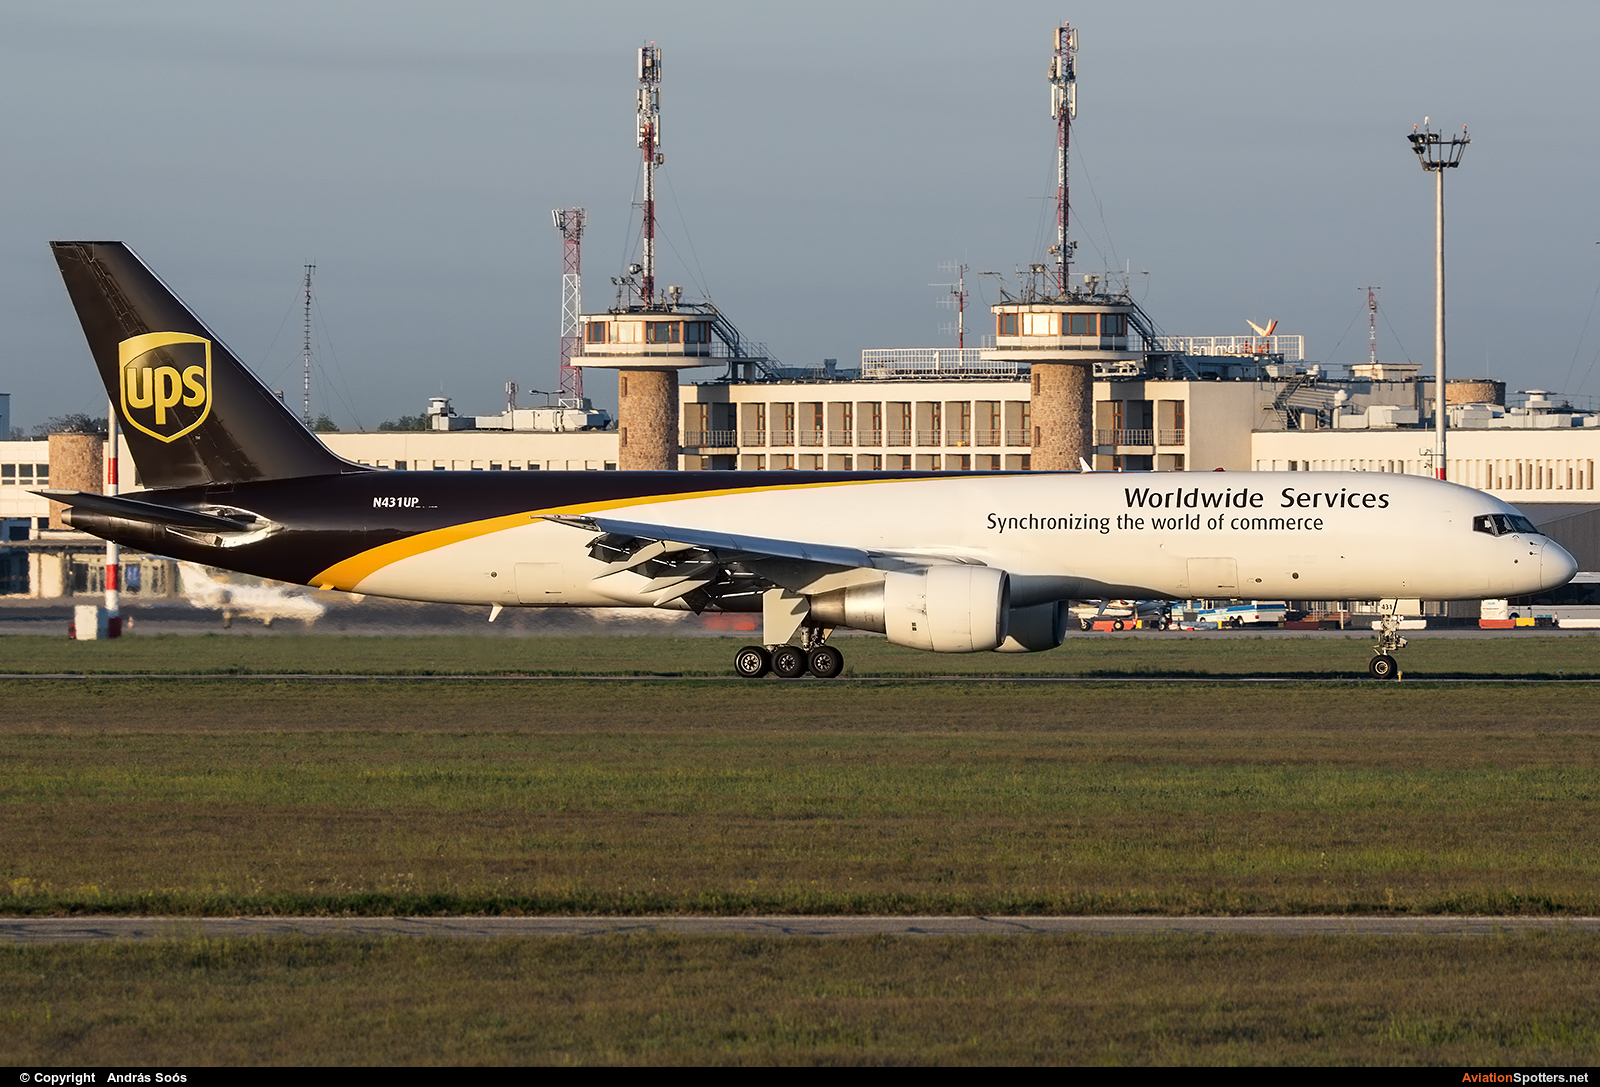 UPS - United Parcel Service  -  757-200F  (N431UP) By András Soós (sas1965)